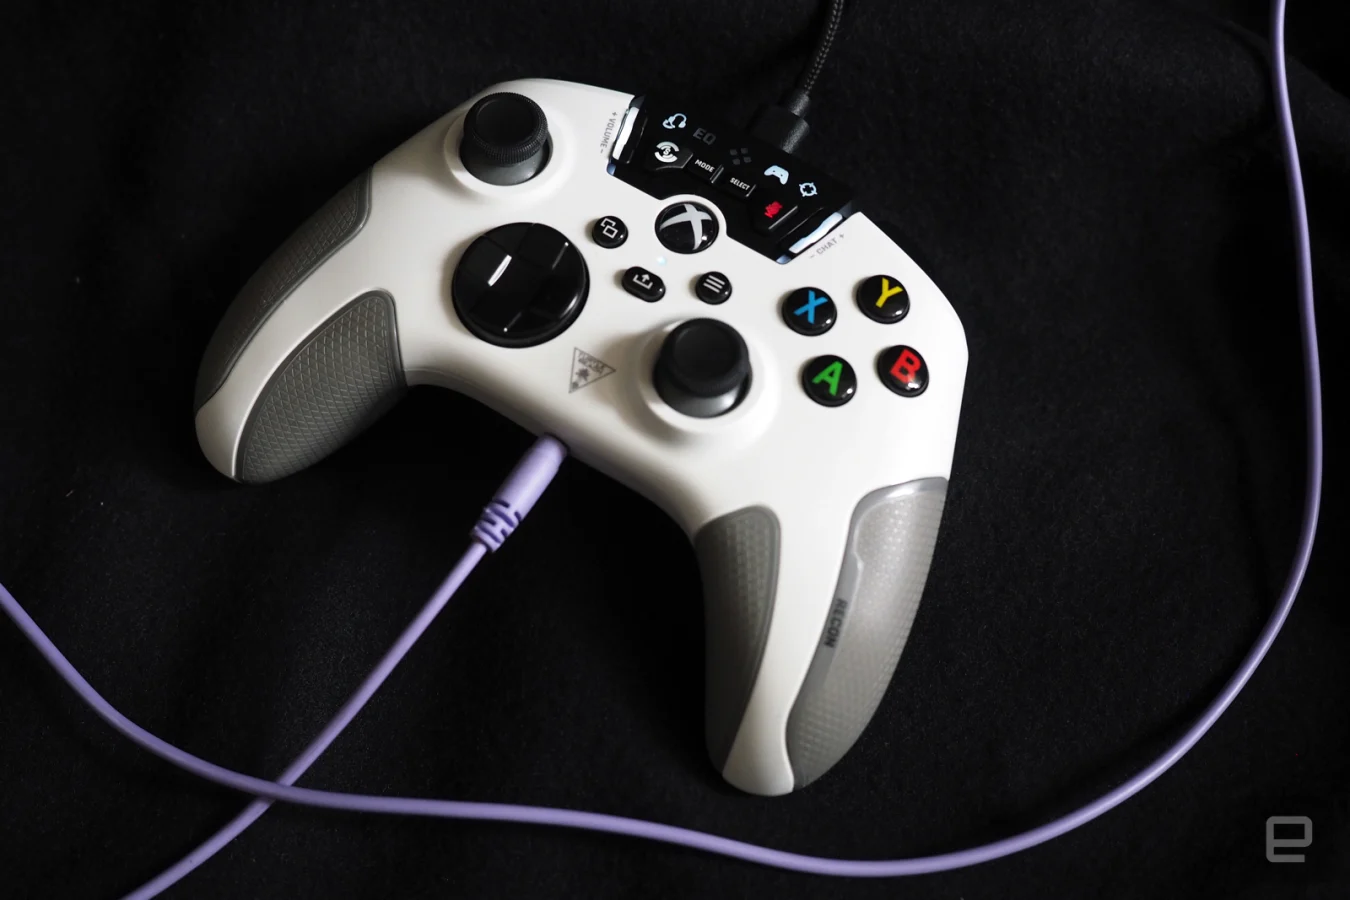 Turtle Beach Recon Controller in white with purple cord plugged in